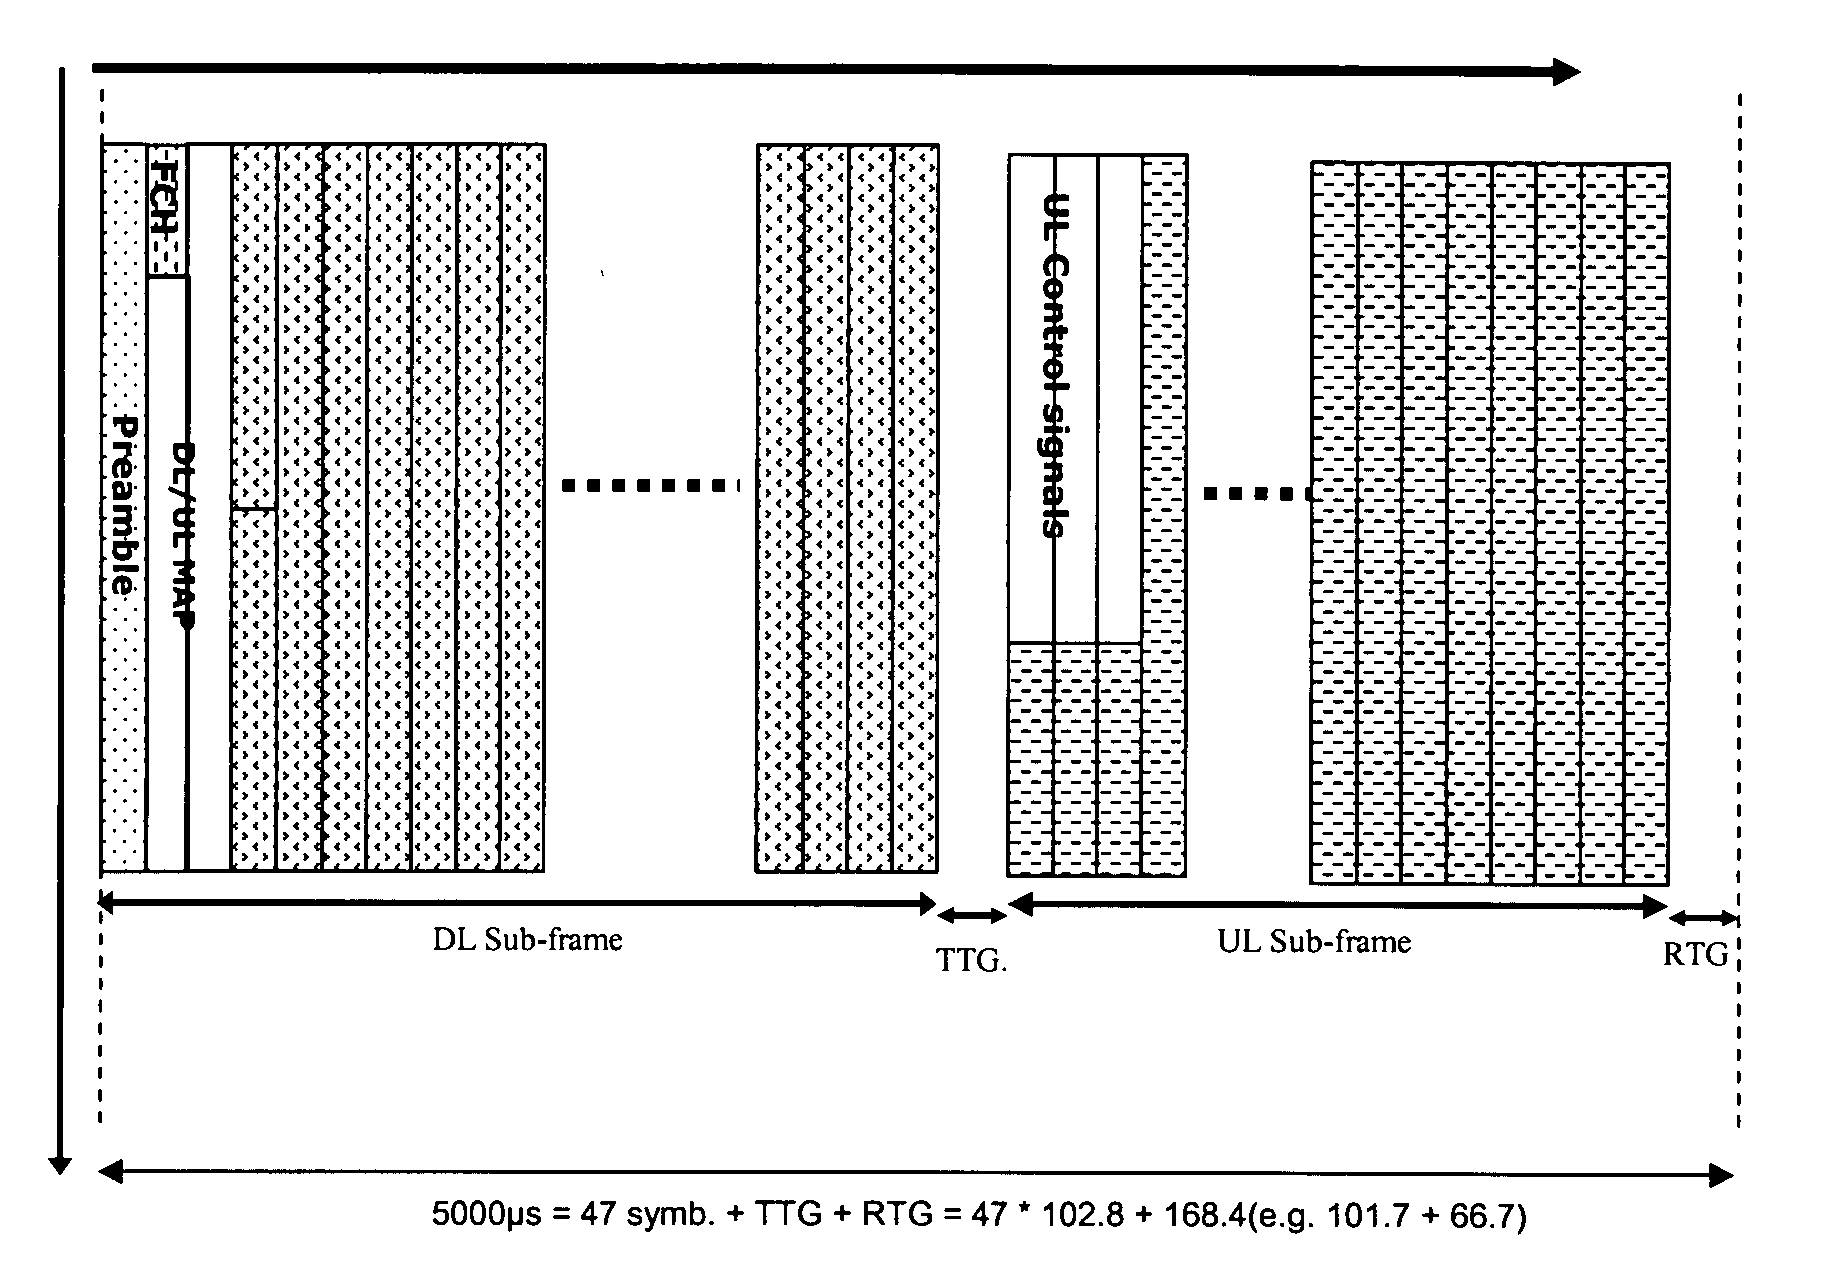 Systems and methods of supporting multiple wireless communication technologies